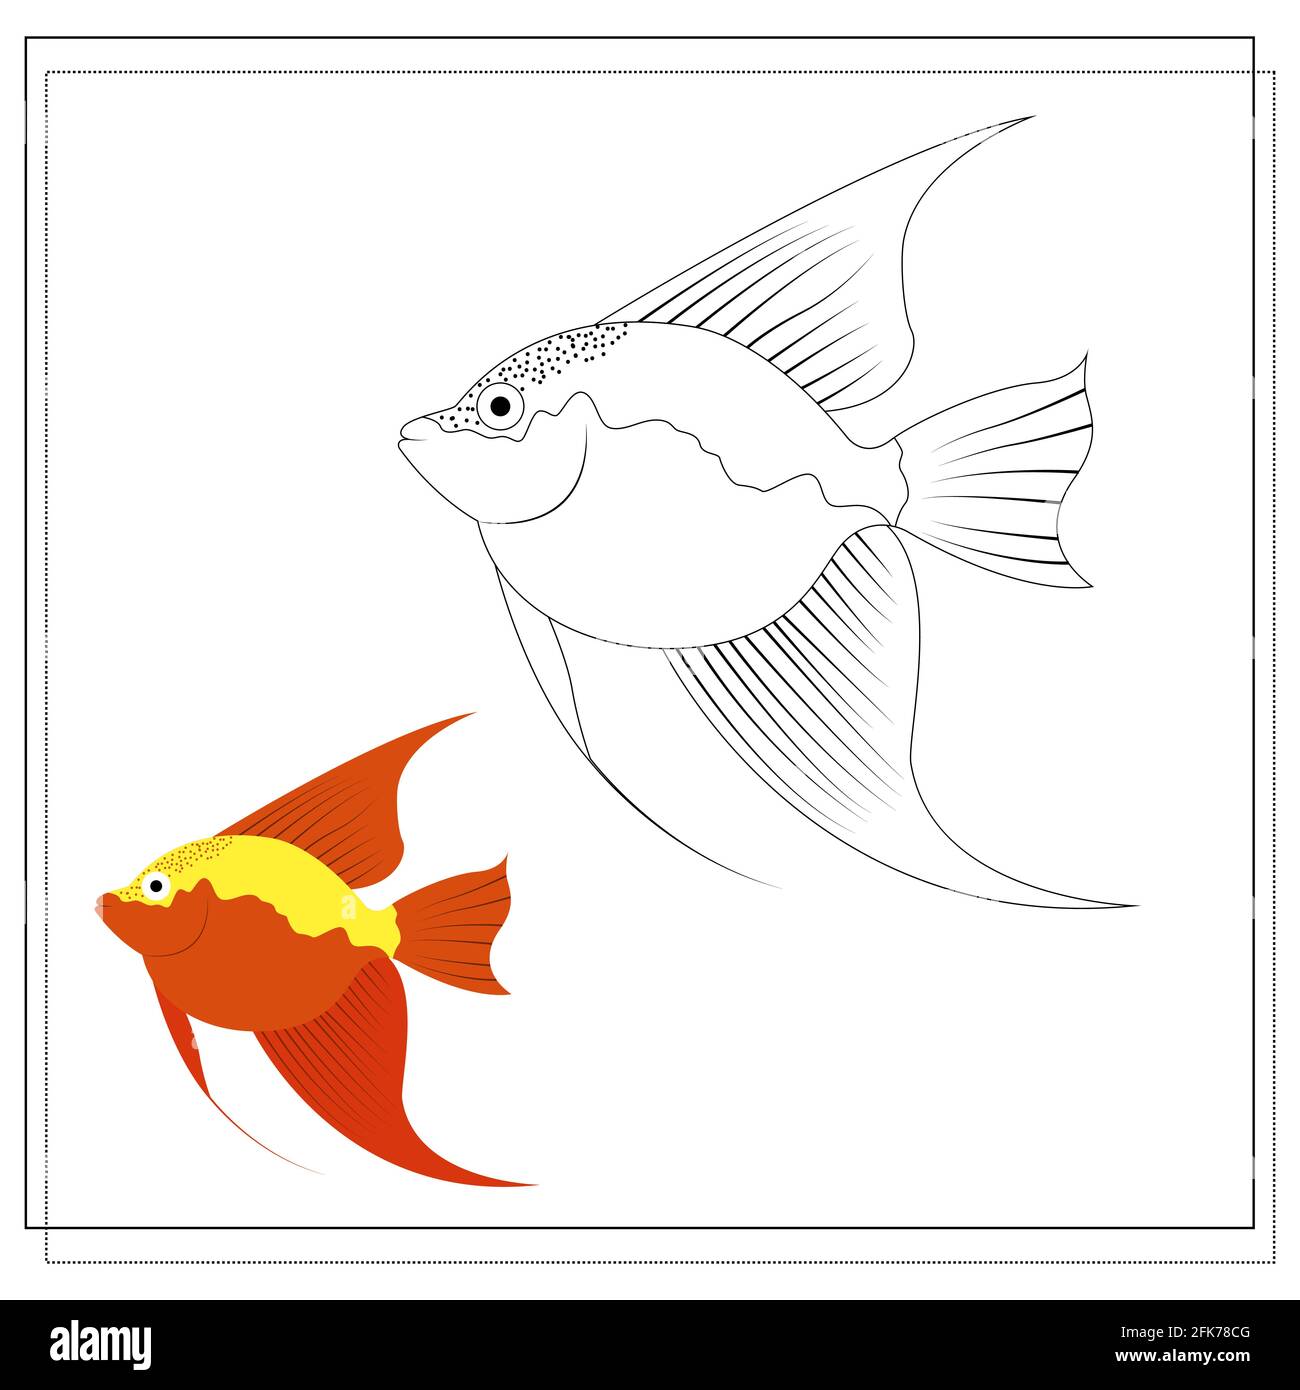 Page of a coloring book, orange fish with yellow stripes. Color